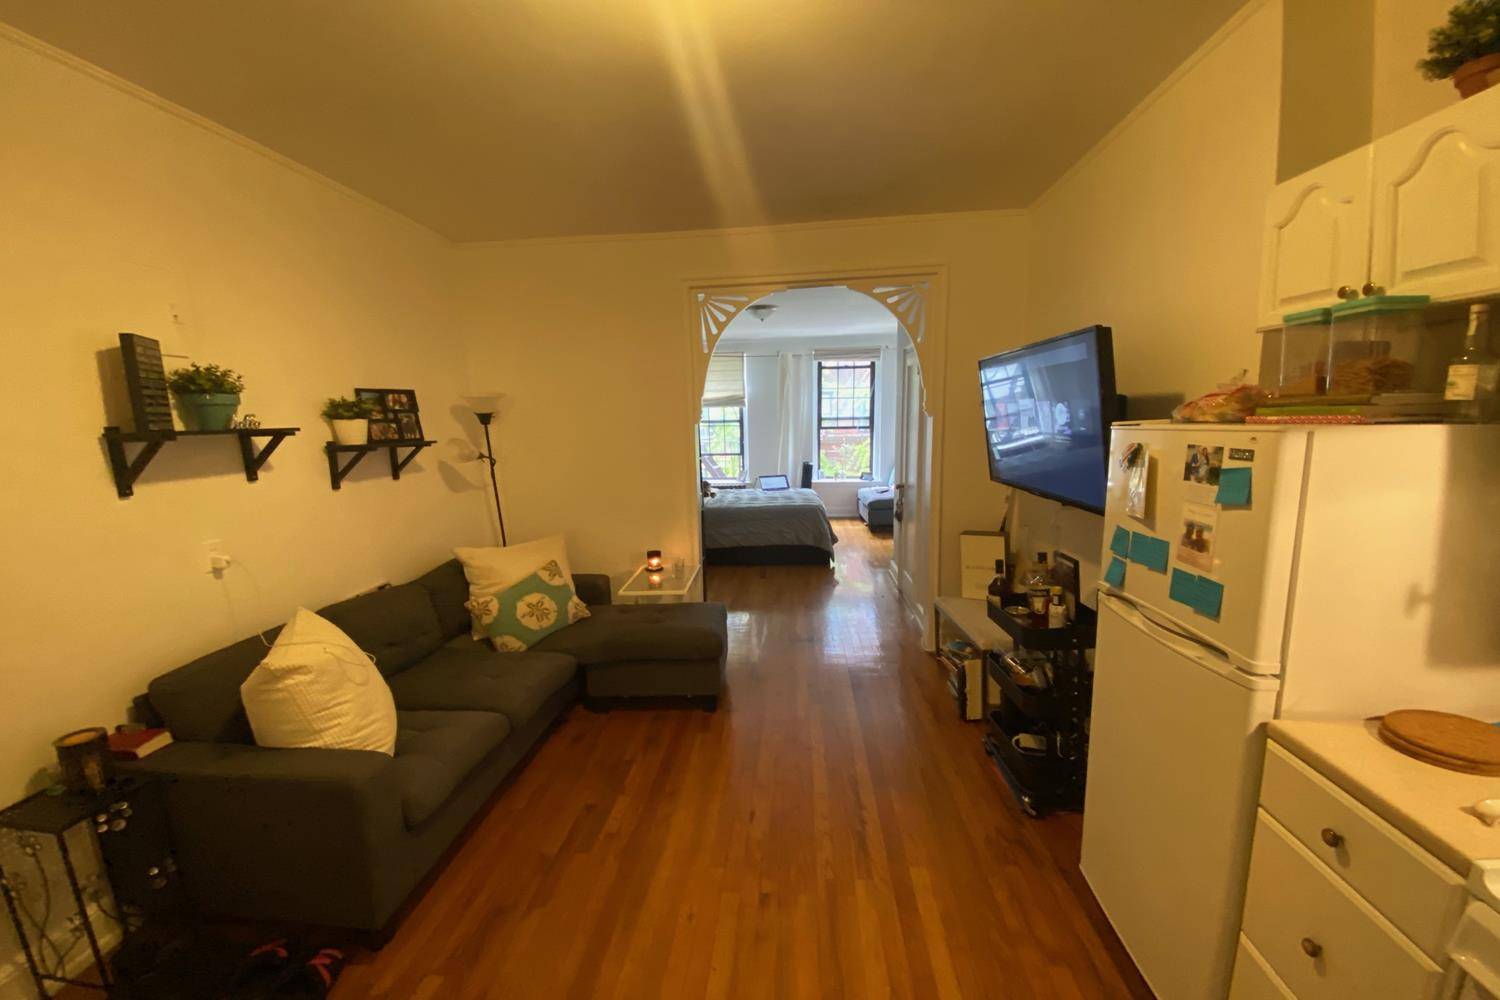 SPACIOUS LOFT LIKE Jr. 1 BEDROOM in BEST SOHO LOCATION This apartment is situated in one of the best quite tree lined streets in Soho.